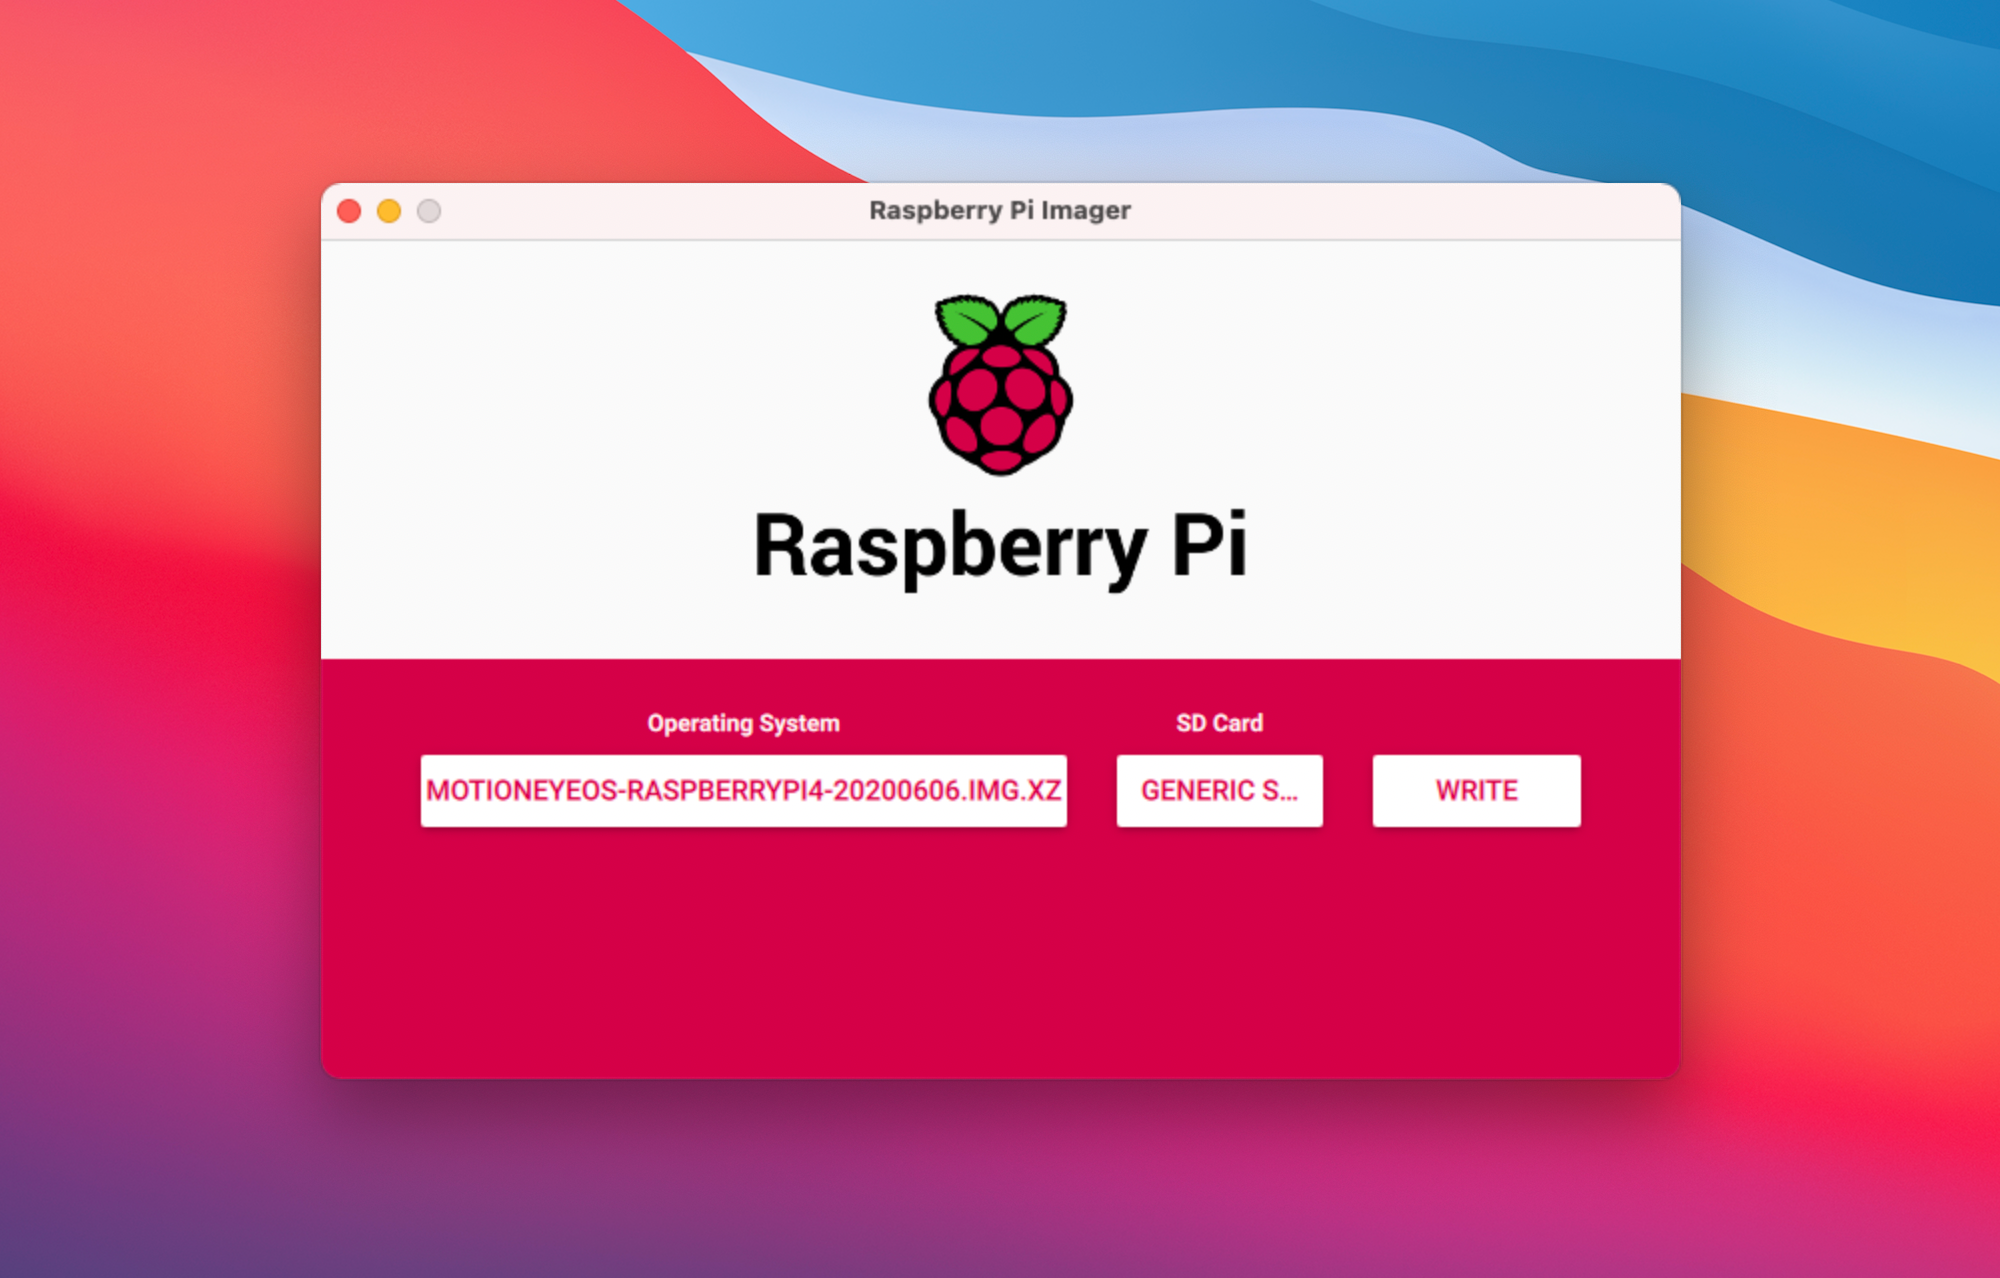 Write motionEyeOS with Raspberry Pi Imager